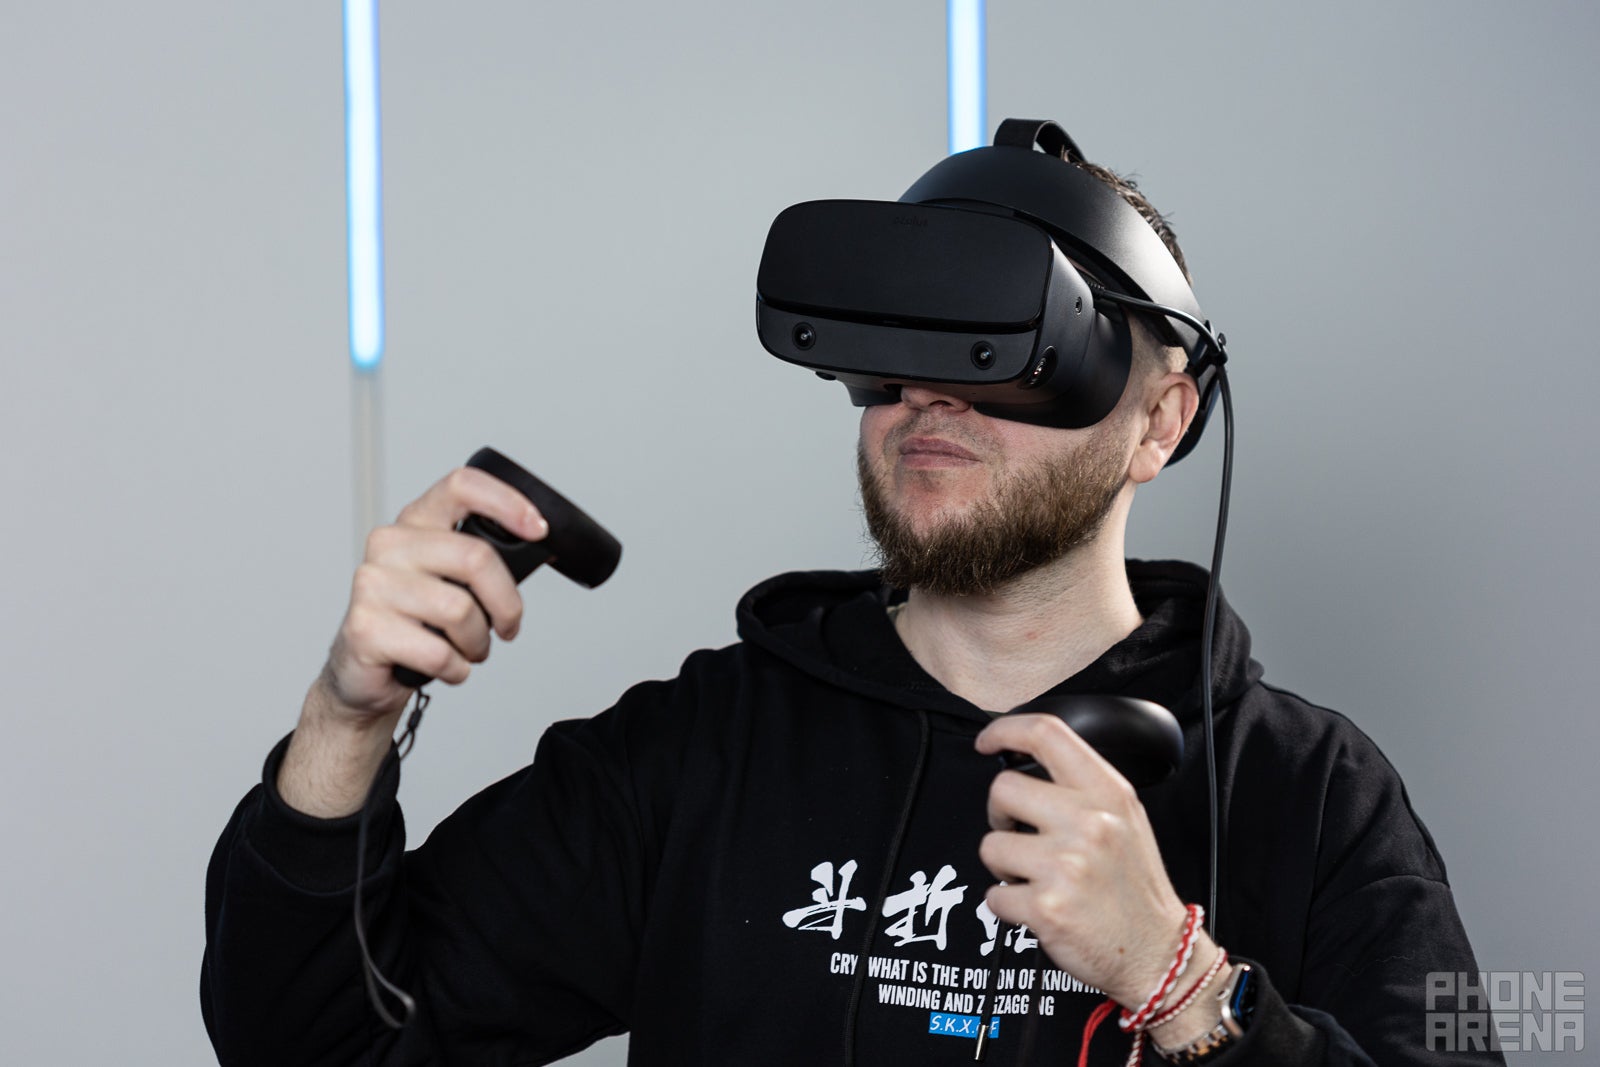 (Image Credit - PhoneArena) Oculus Rift S in use - Meta Quest 2 vs Oculus Rift S: Which one should you buy? The standalone VR headset or the PCVR-only